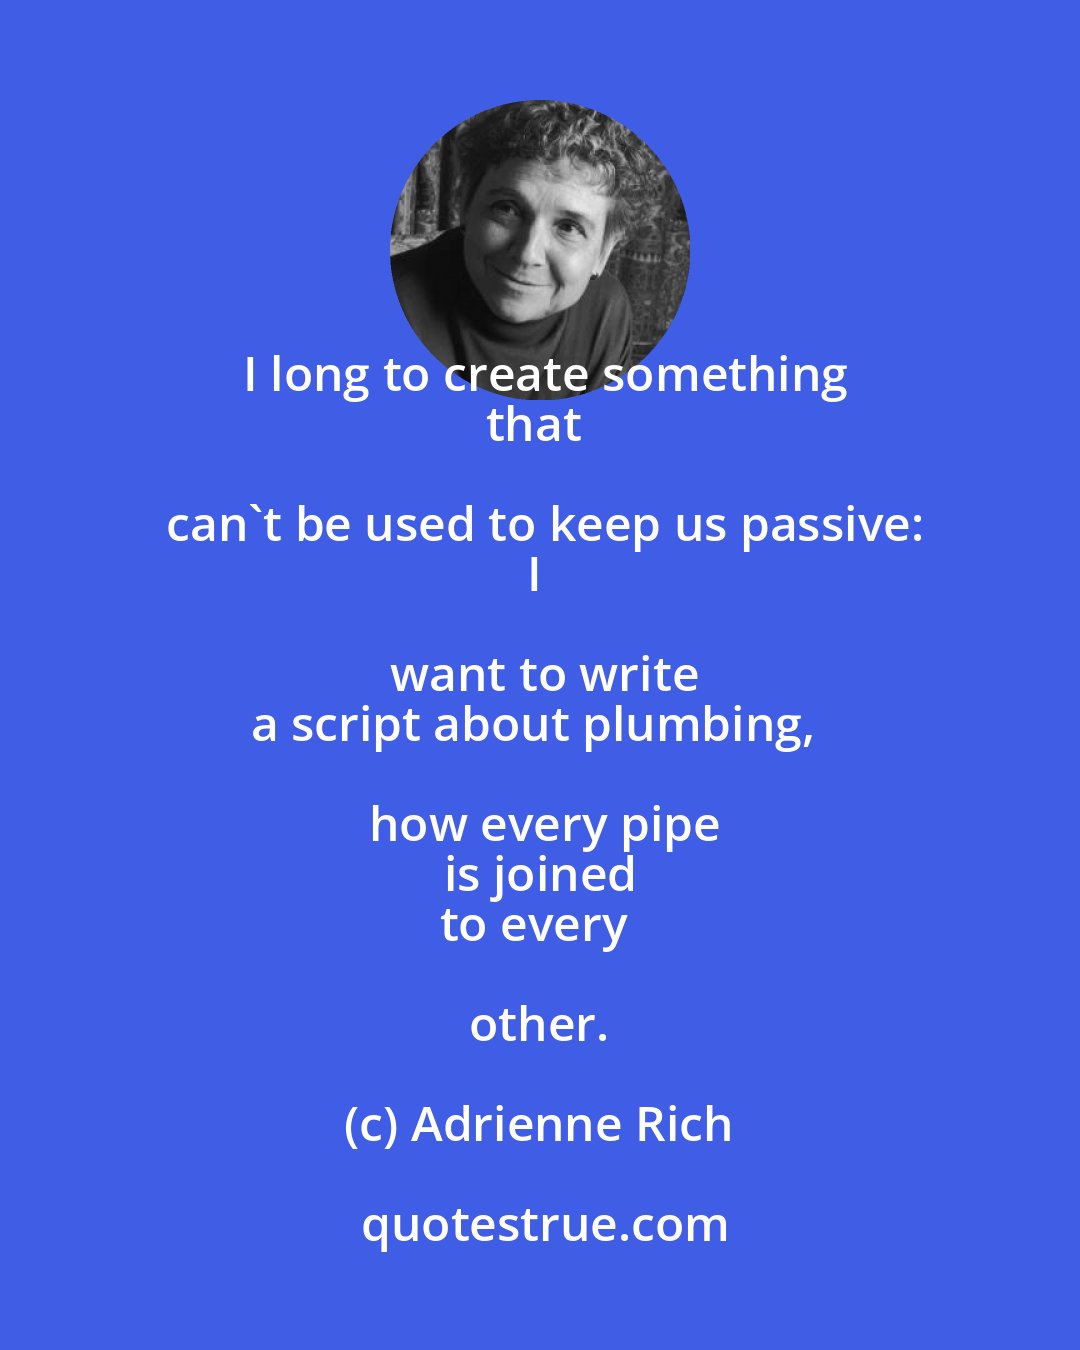 Adrienne Rich: I long to create something
that can't be used to keep us passive:
I want to write
a script about plumbing, how every pipe
is joined
to every other.